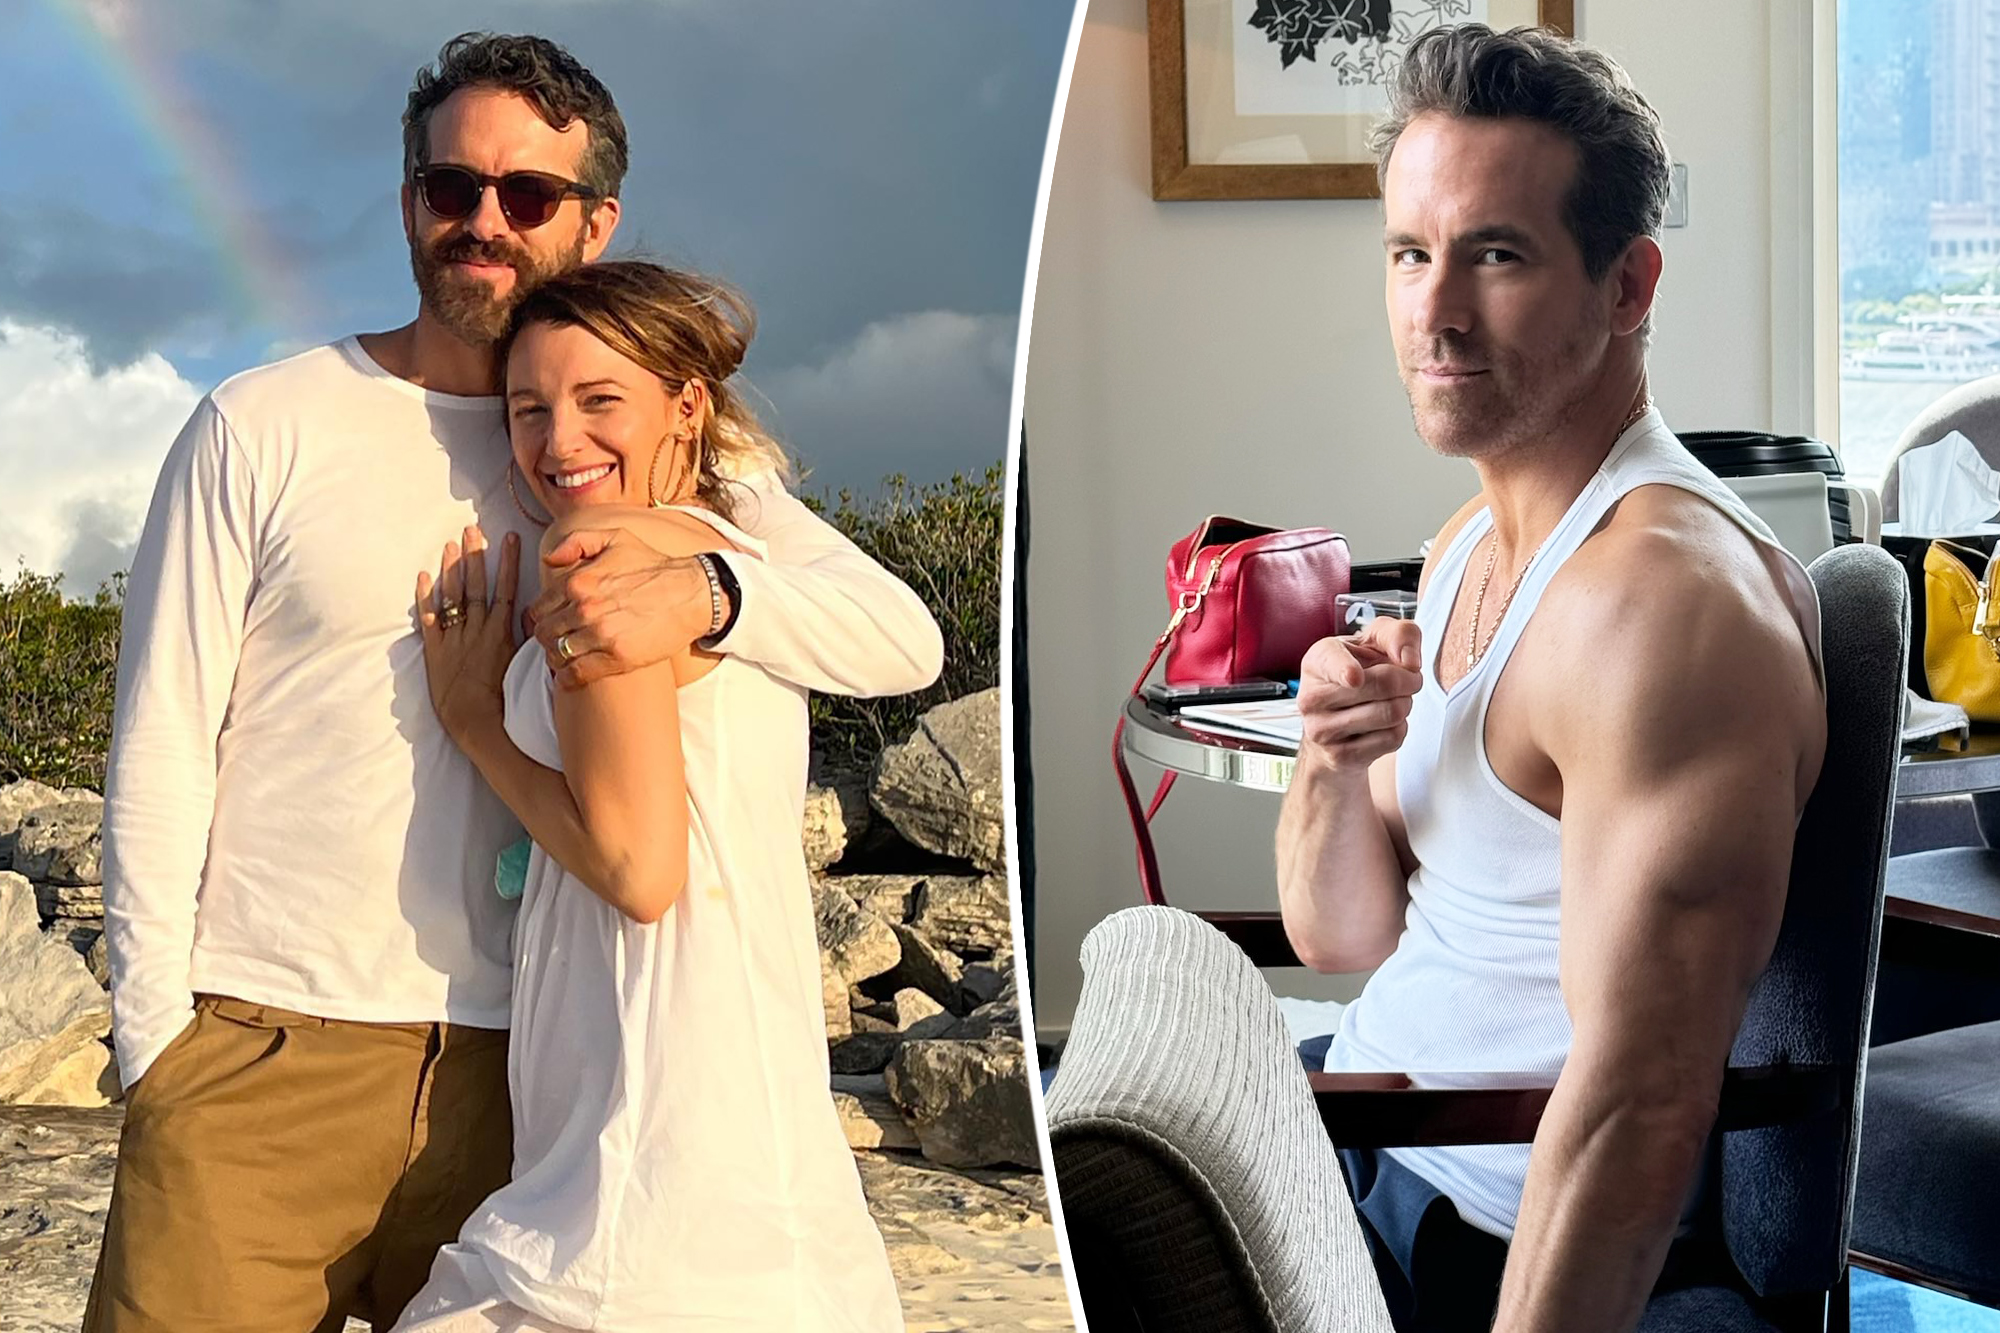 Blake Lively Can't Get Enough of Ryan Reynolds Flexing - The Ultimate Thirst Trap!